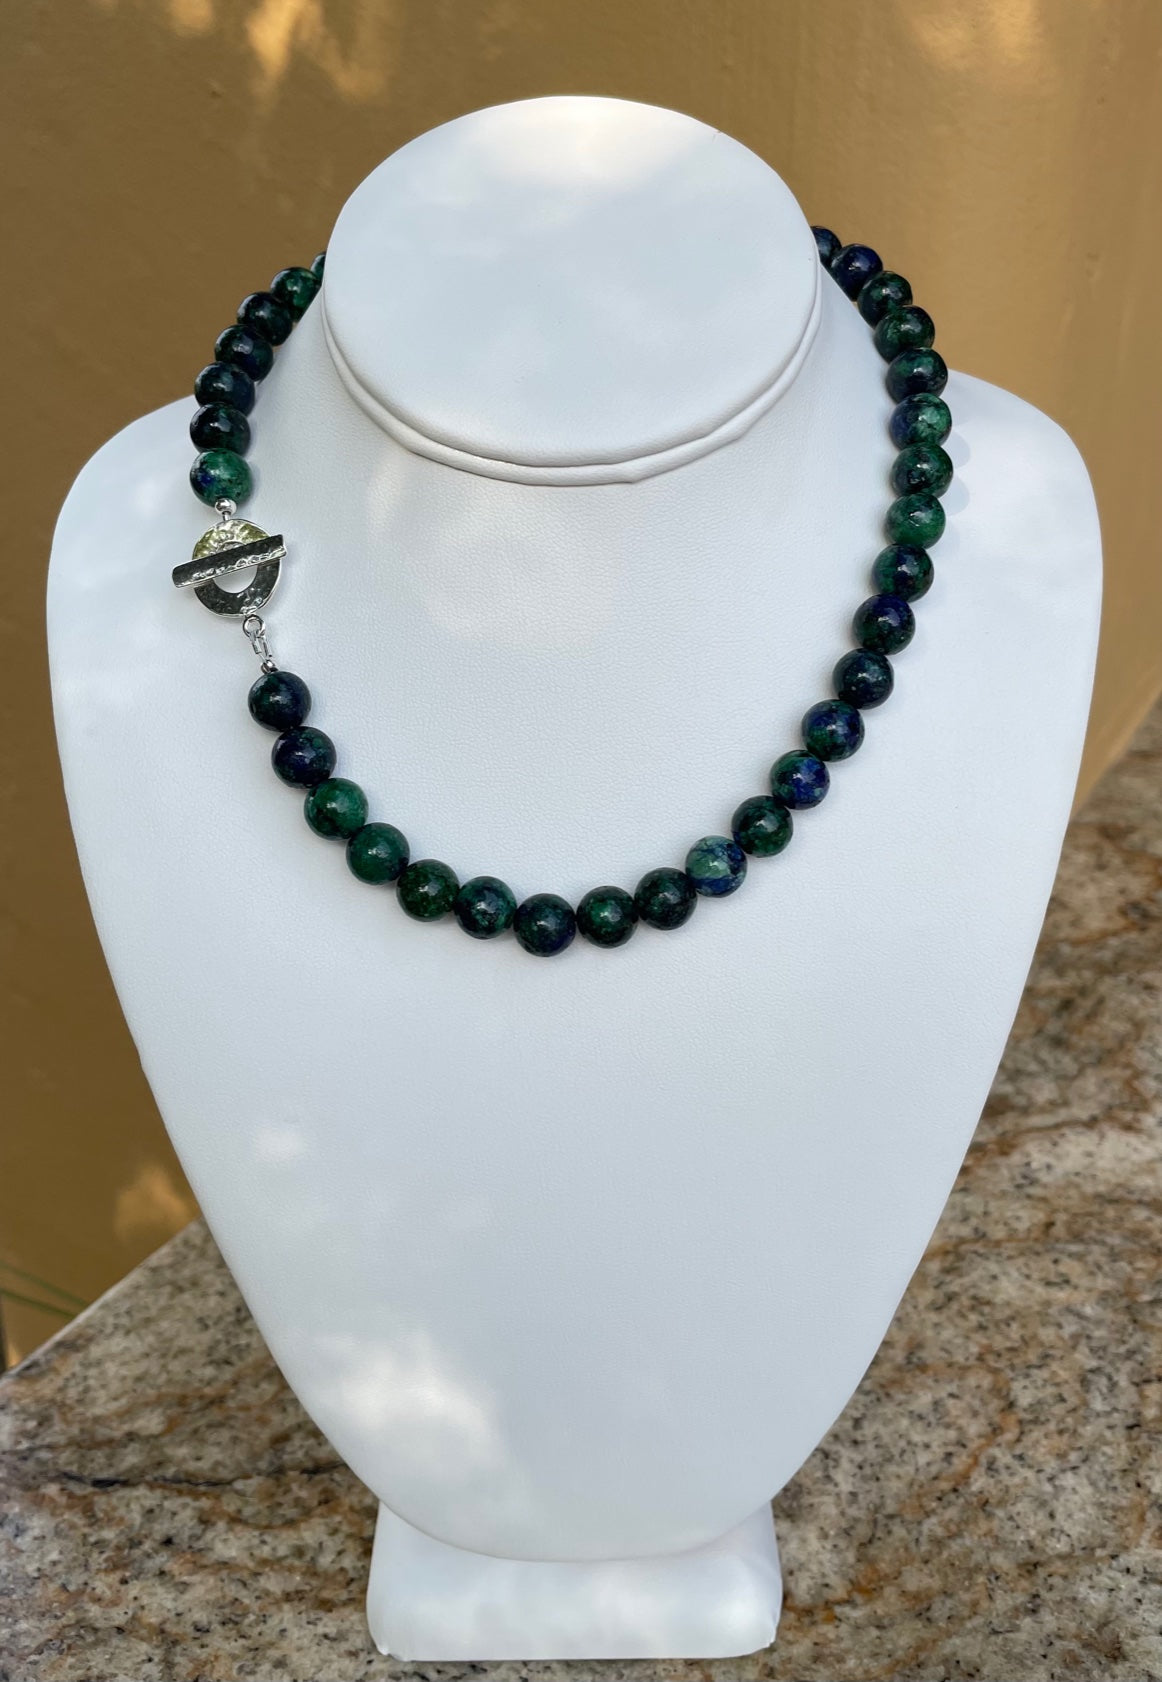 Necklace - Blue and Green Azurite Beads with Sterling silver lobster claw clasp